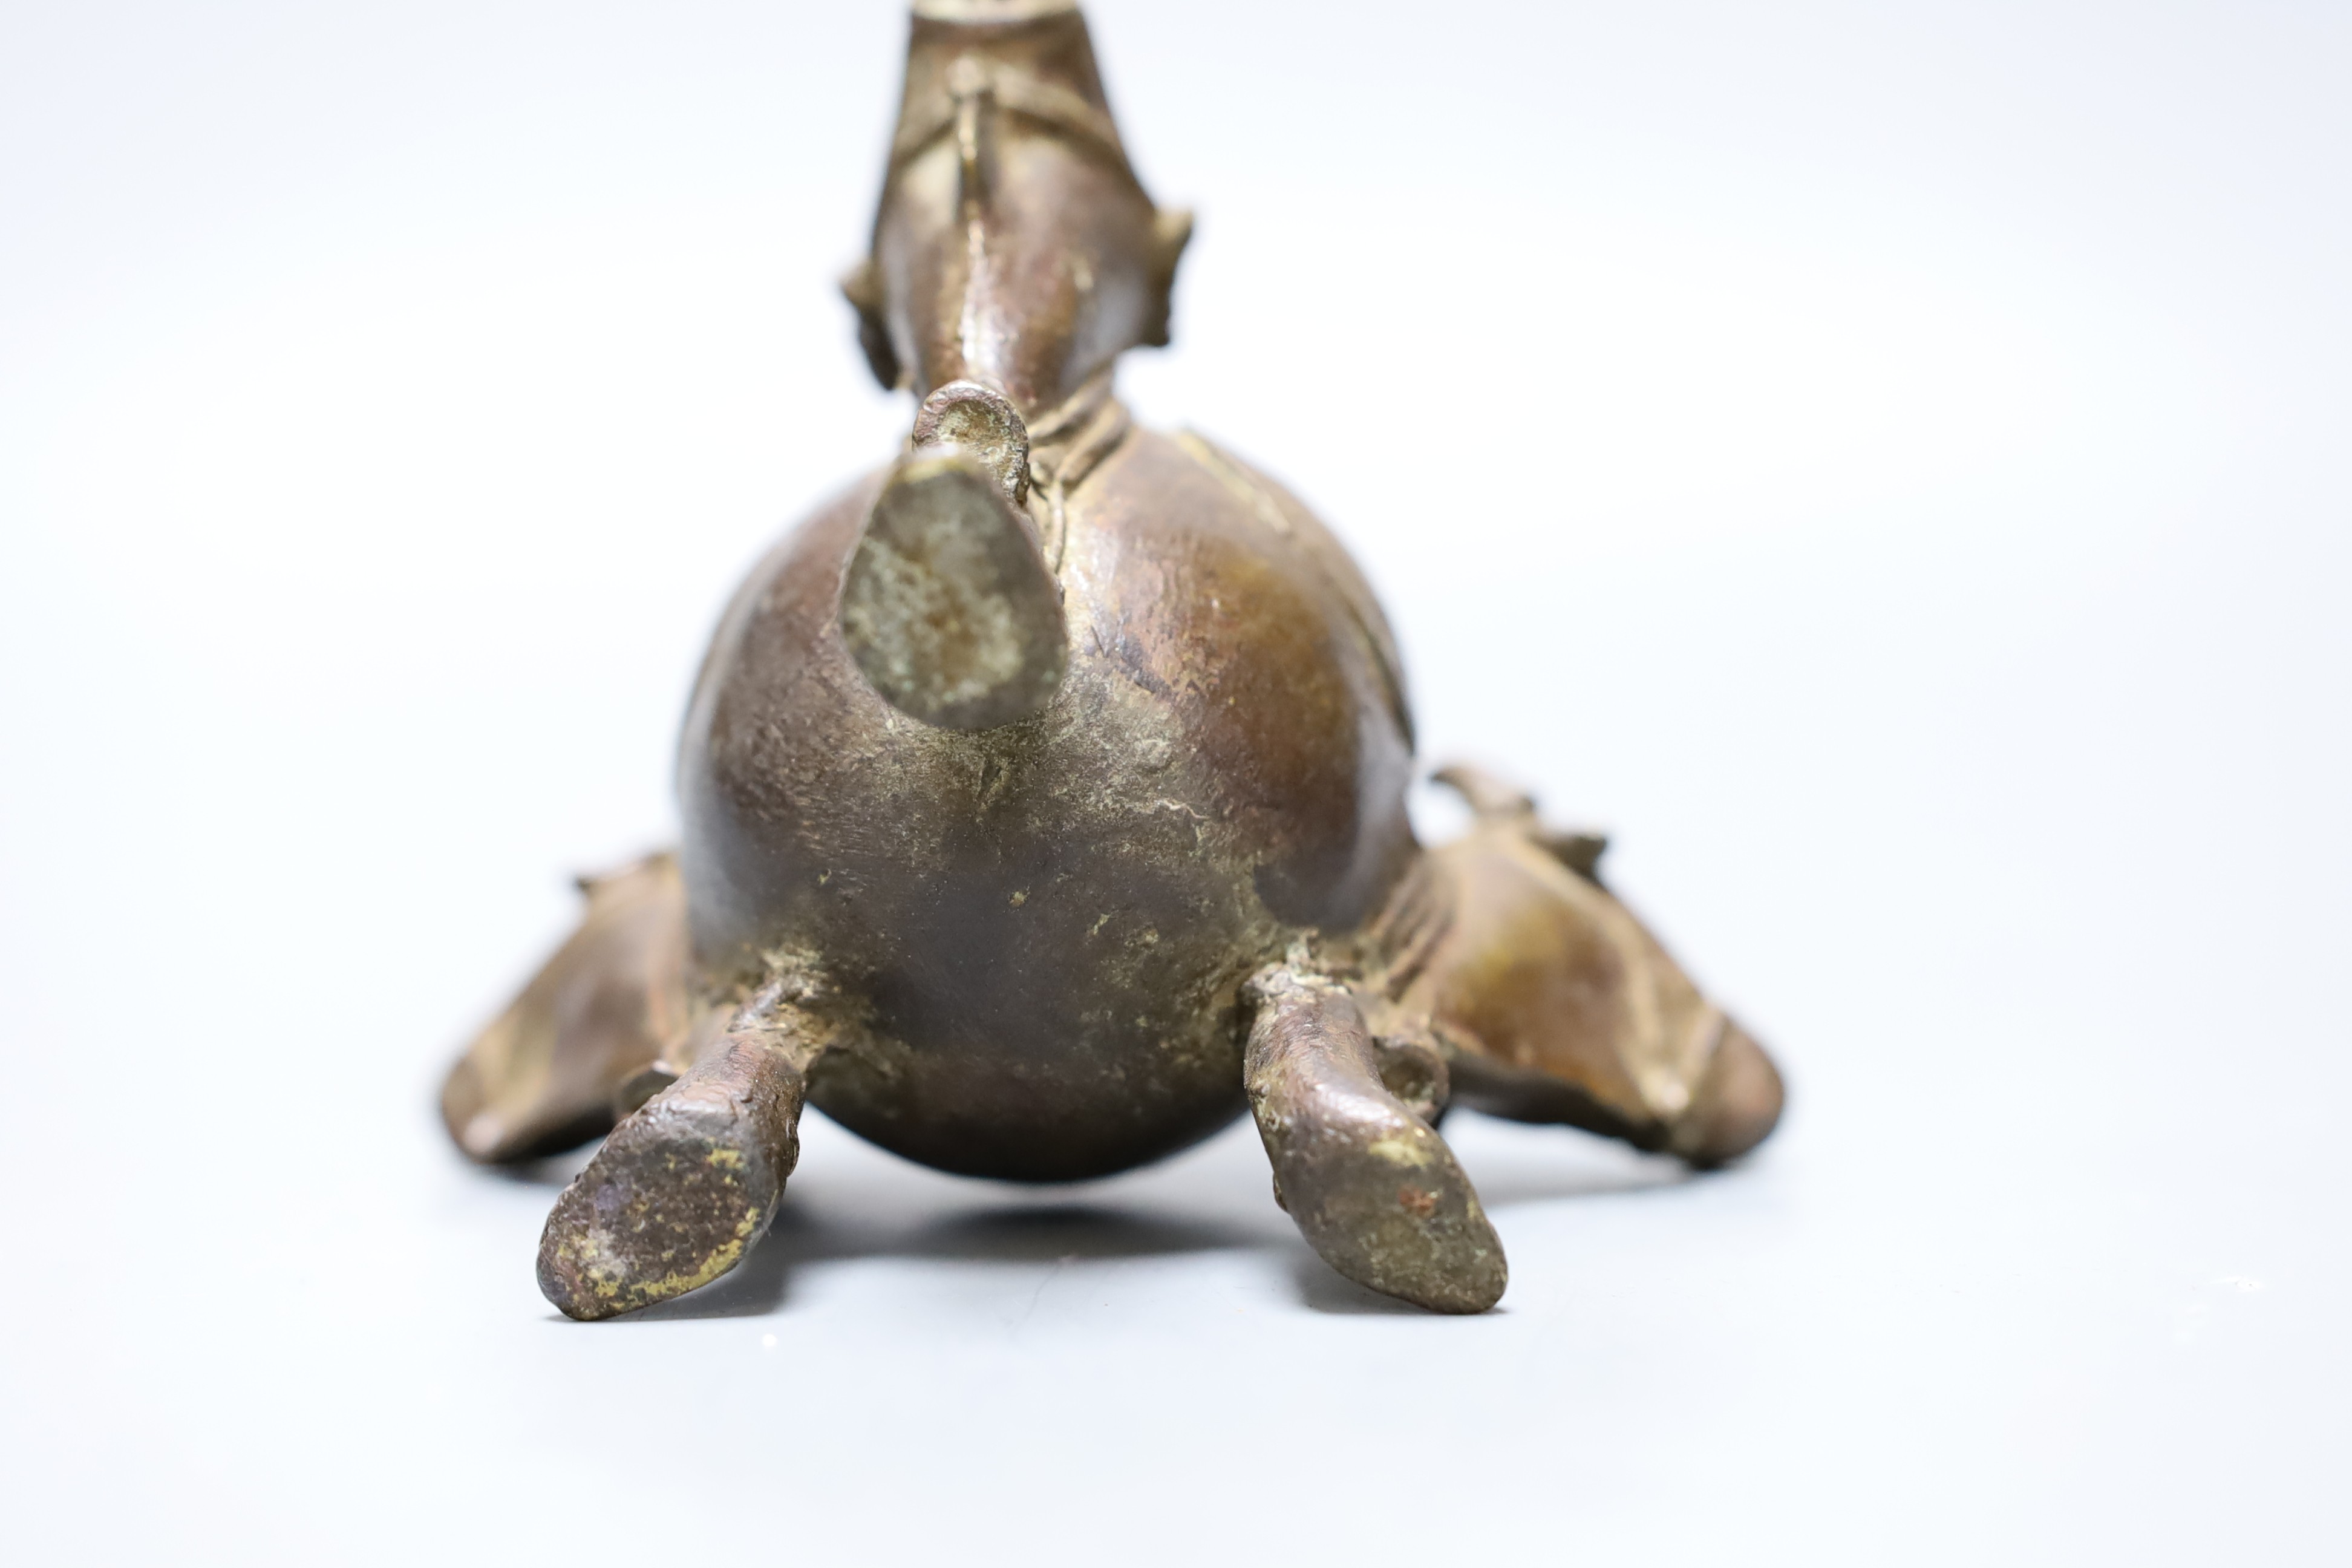 An Indian bronze ox monopdia vessel, 11cms high